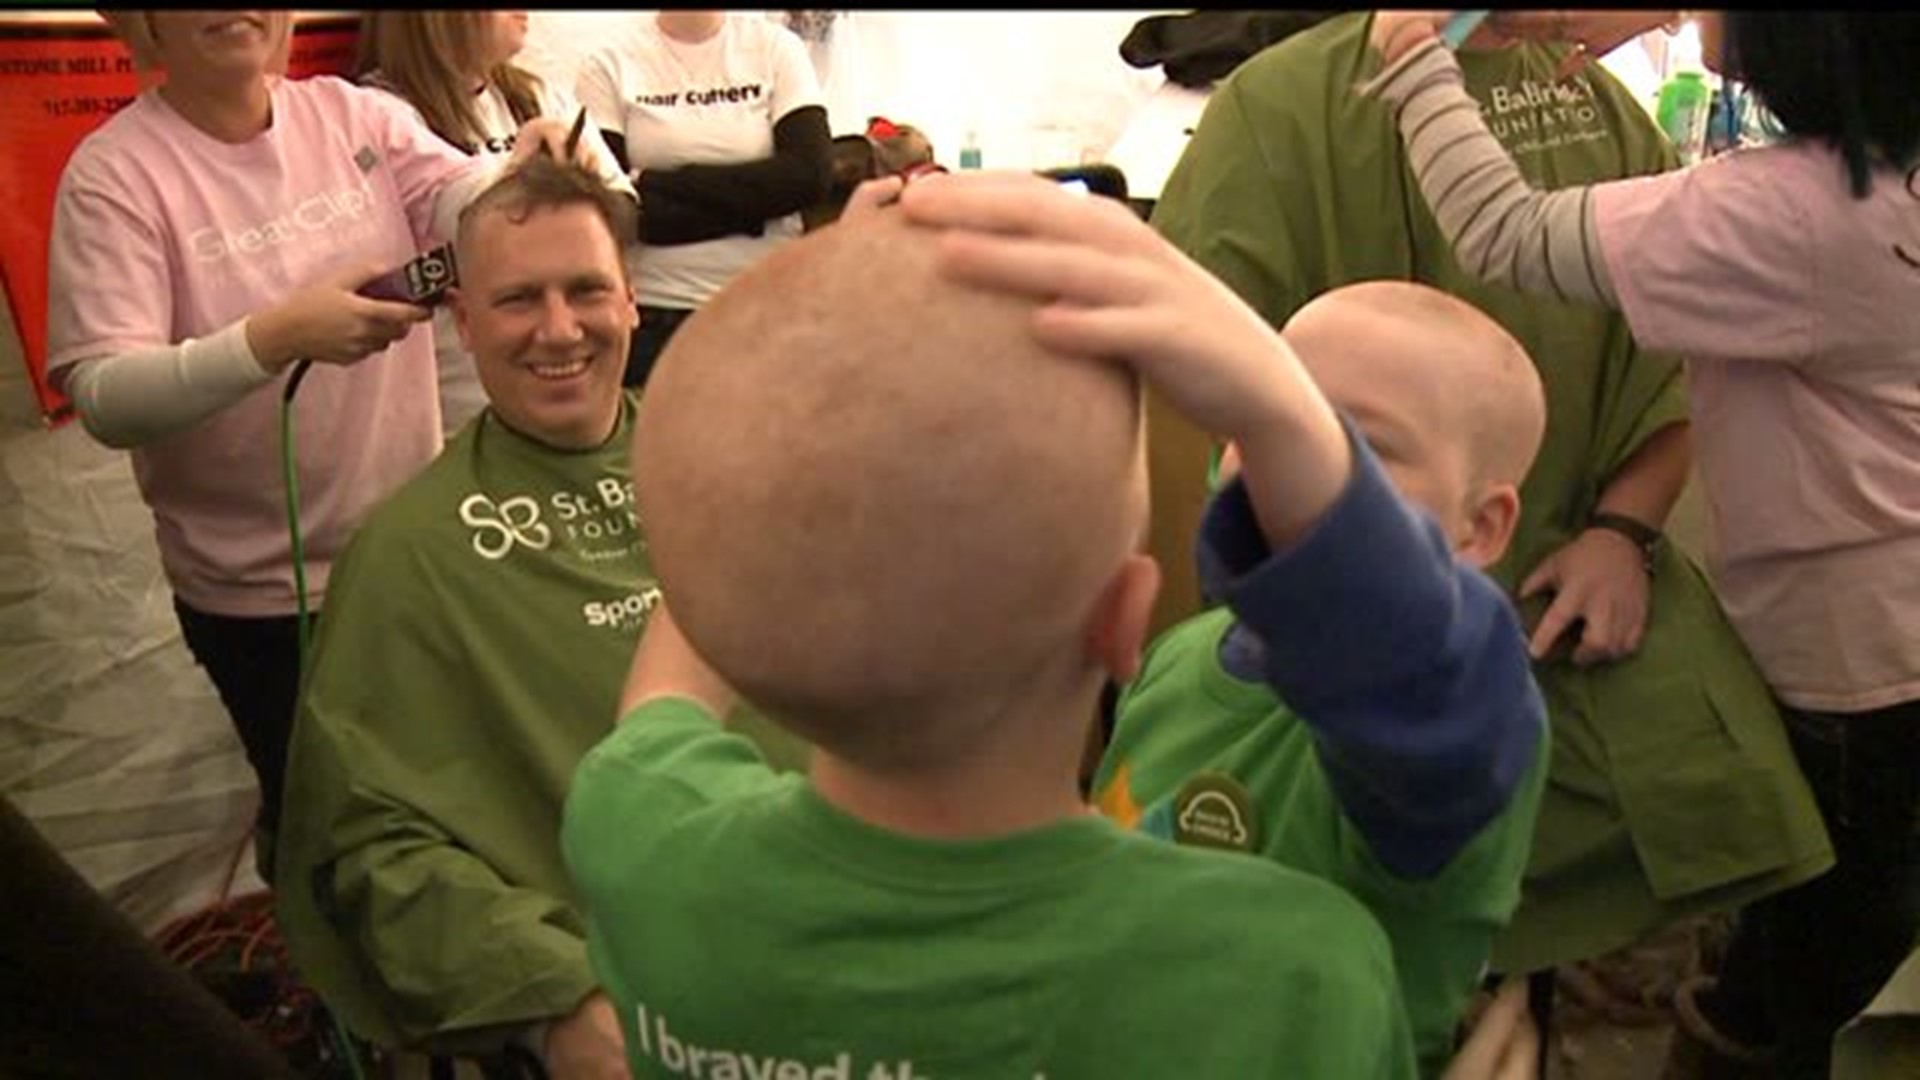 Volunteers go bald for cancer research